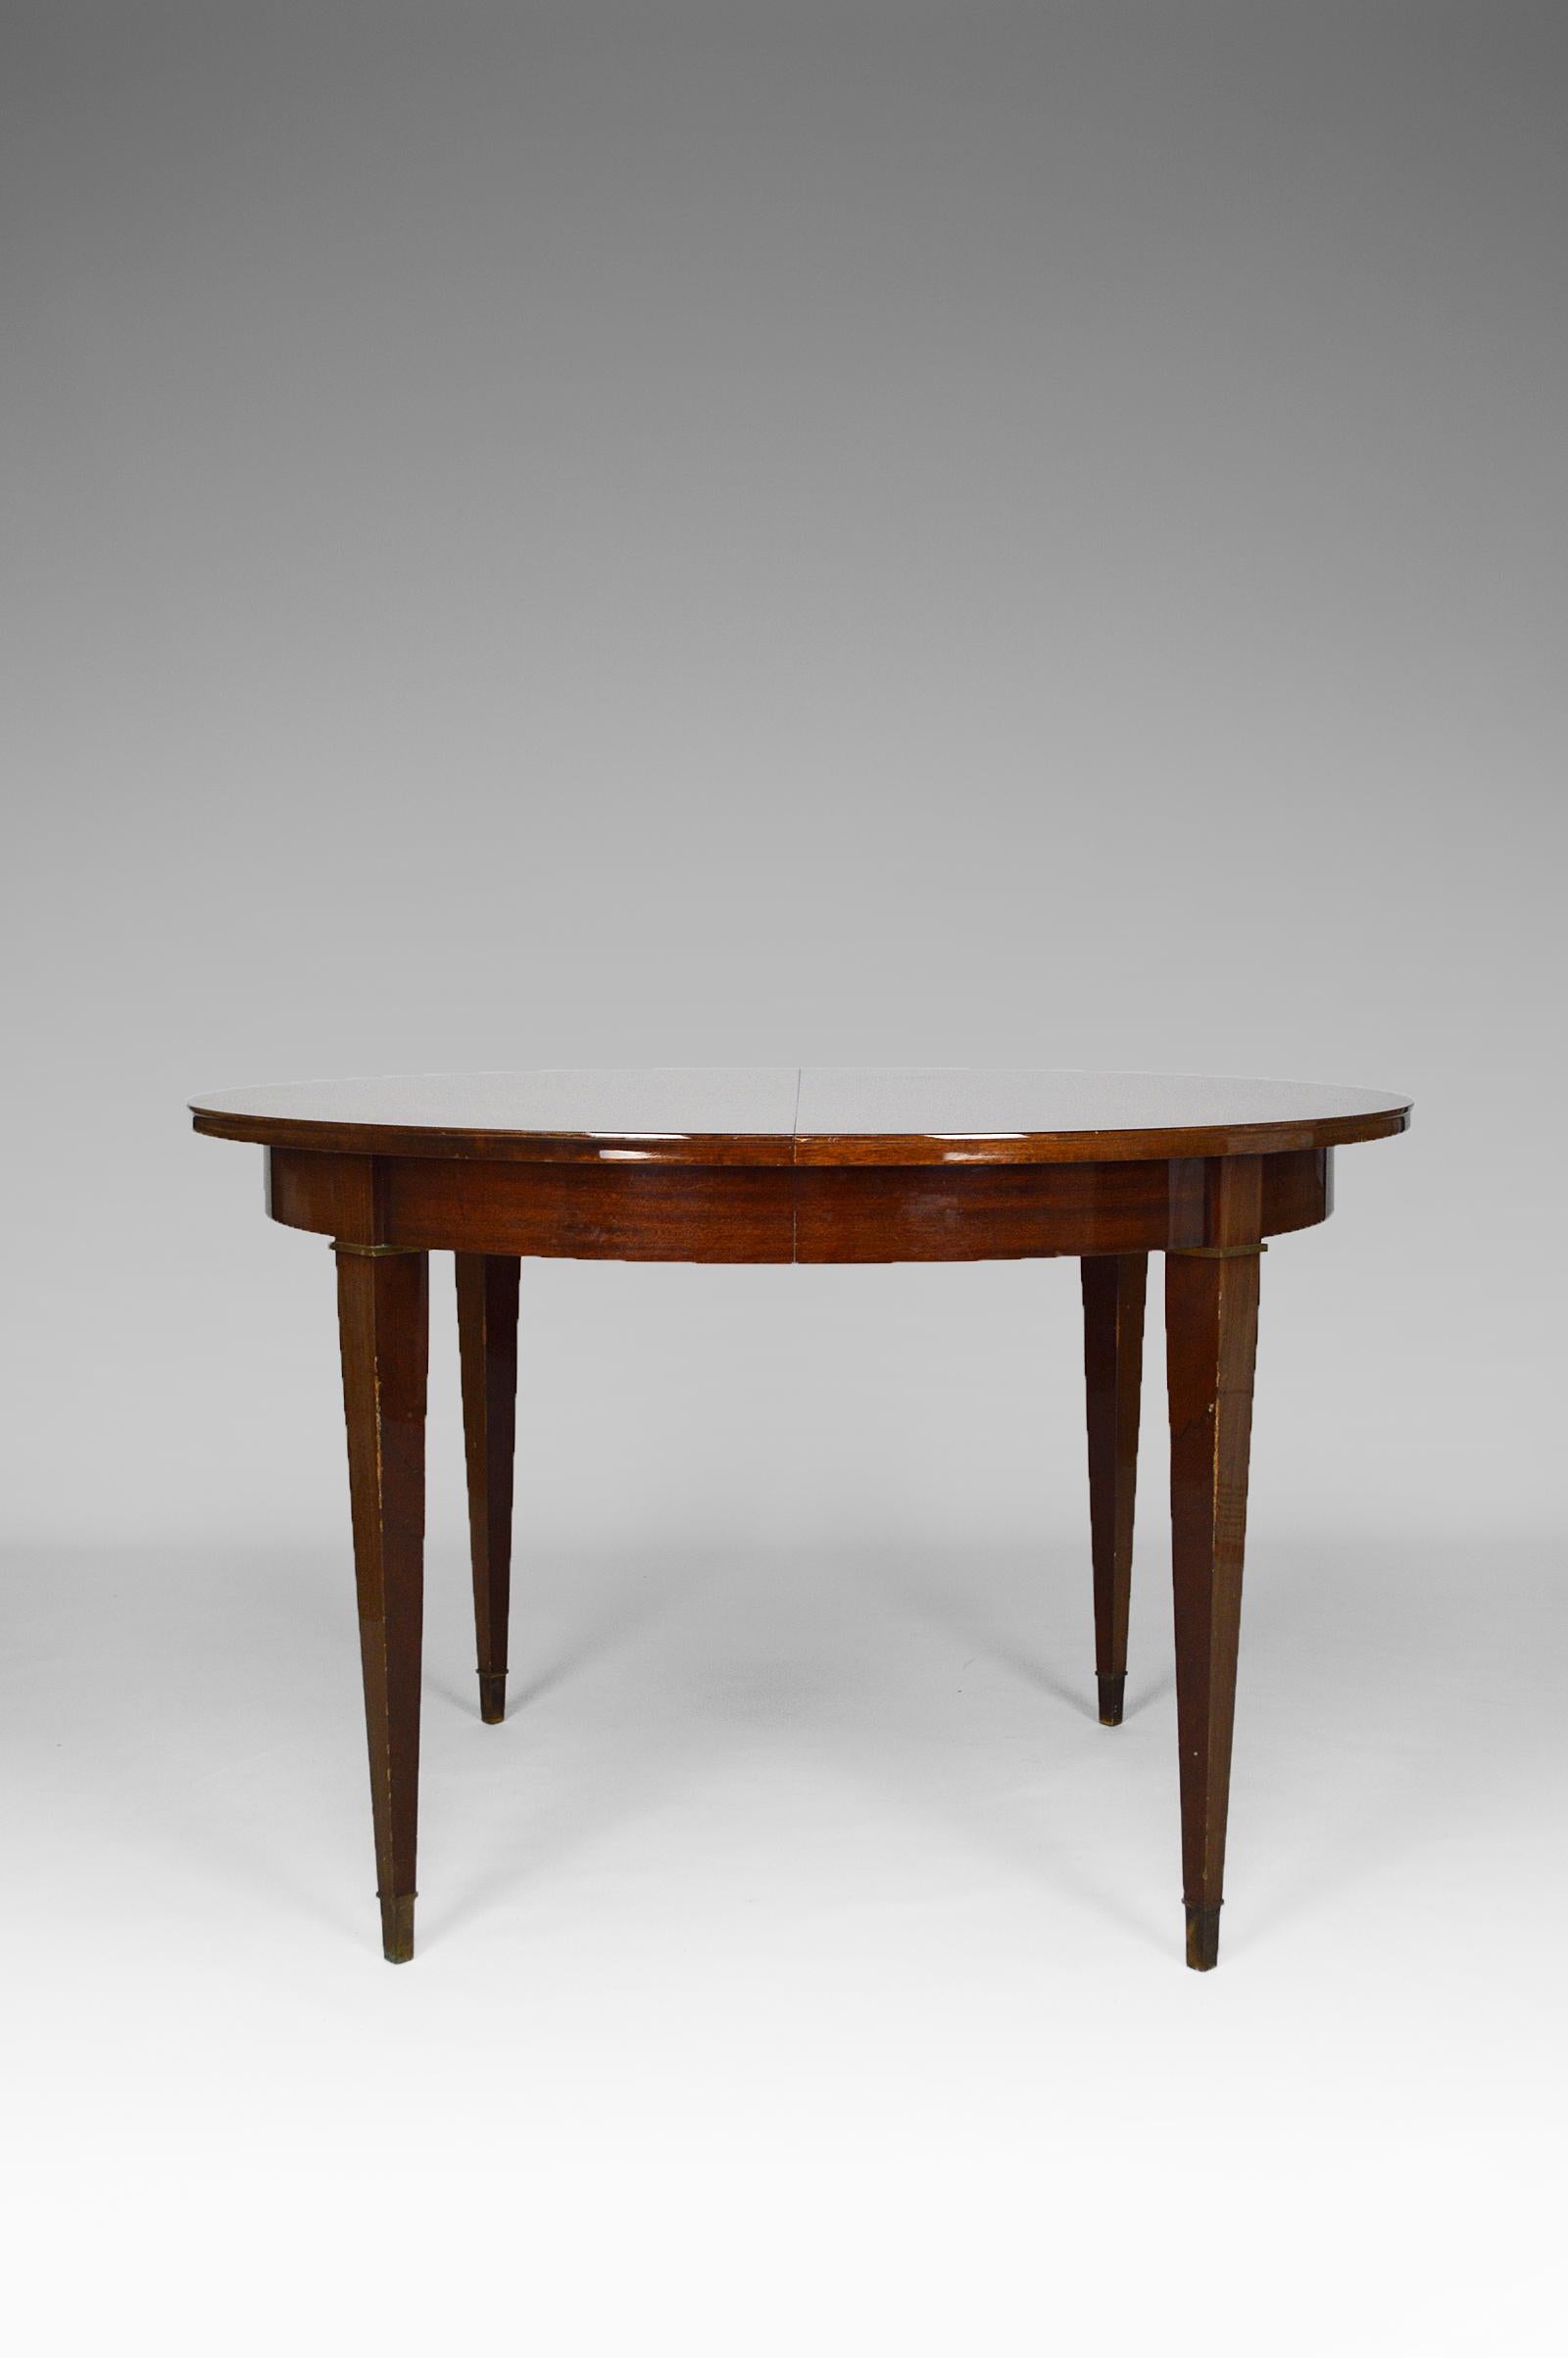 Veneer Art Deco Extendable Round Table in Mahogany, by Jacques Adnet, circa 1940 For Sale